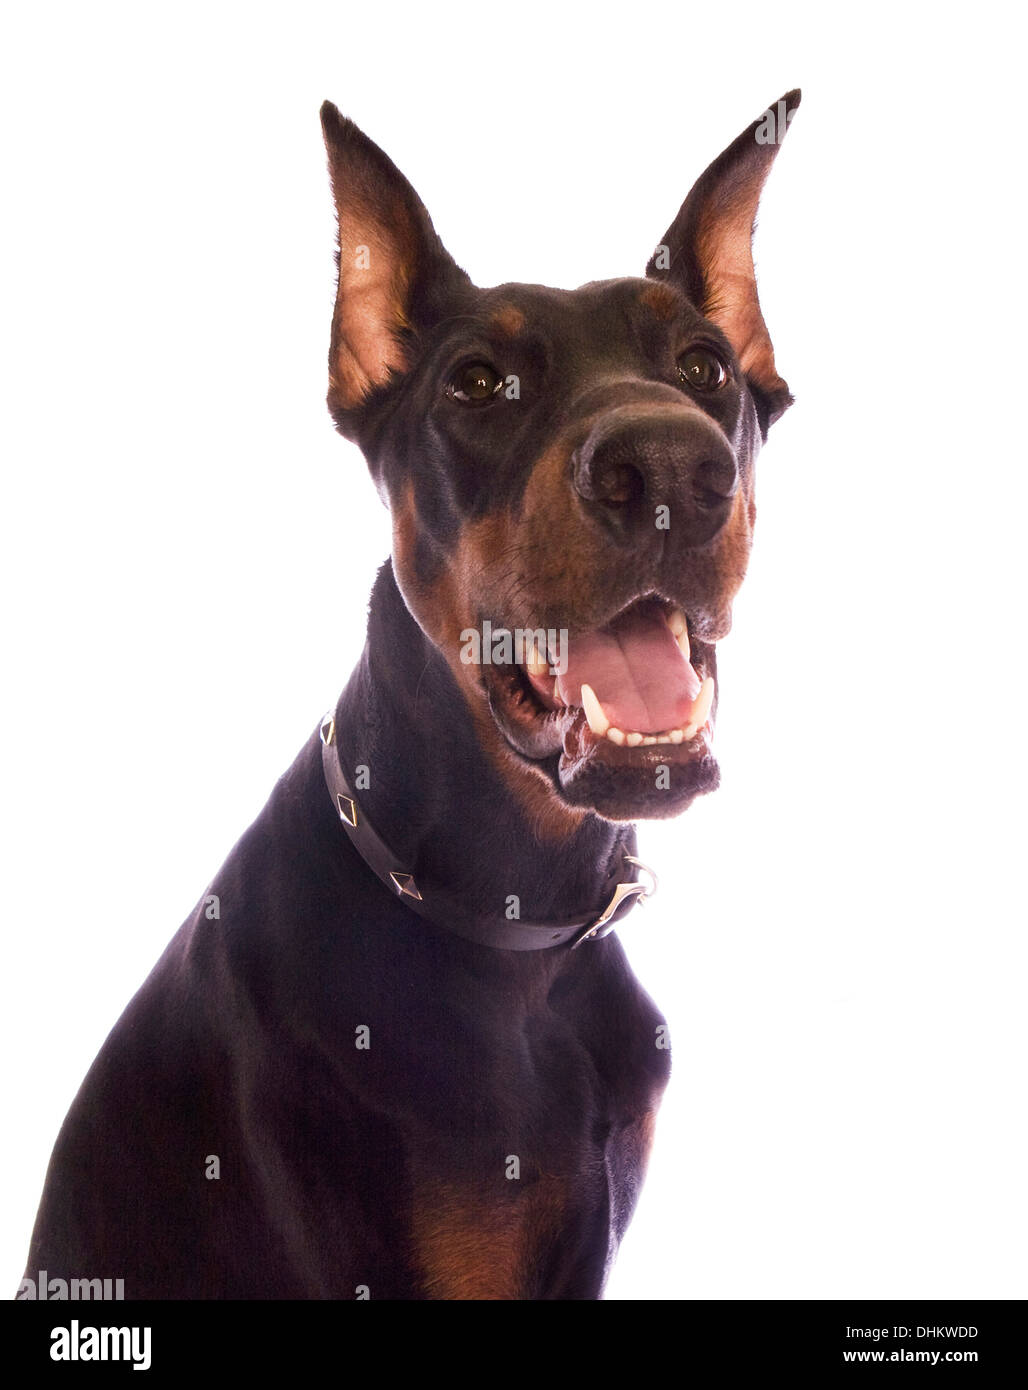 Dobermann dog head shot isolated on white Banque D'Images